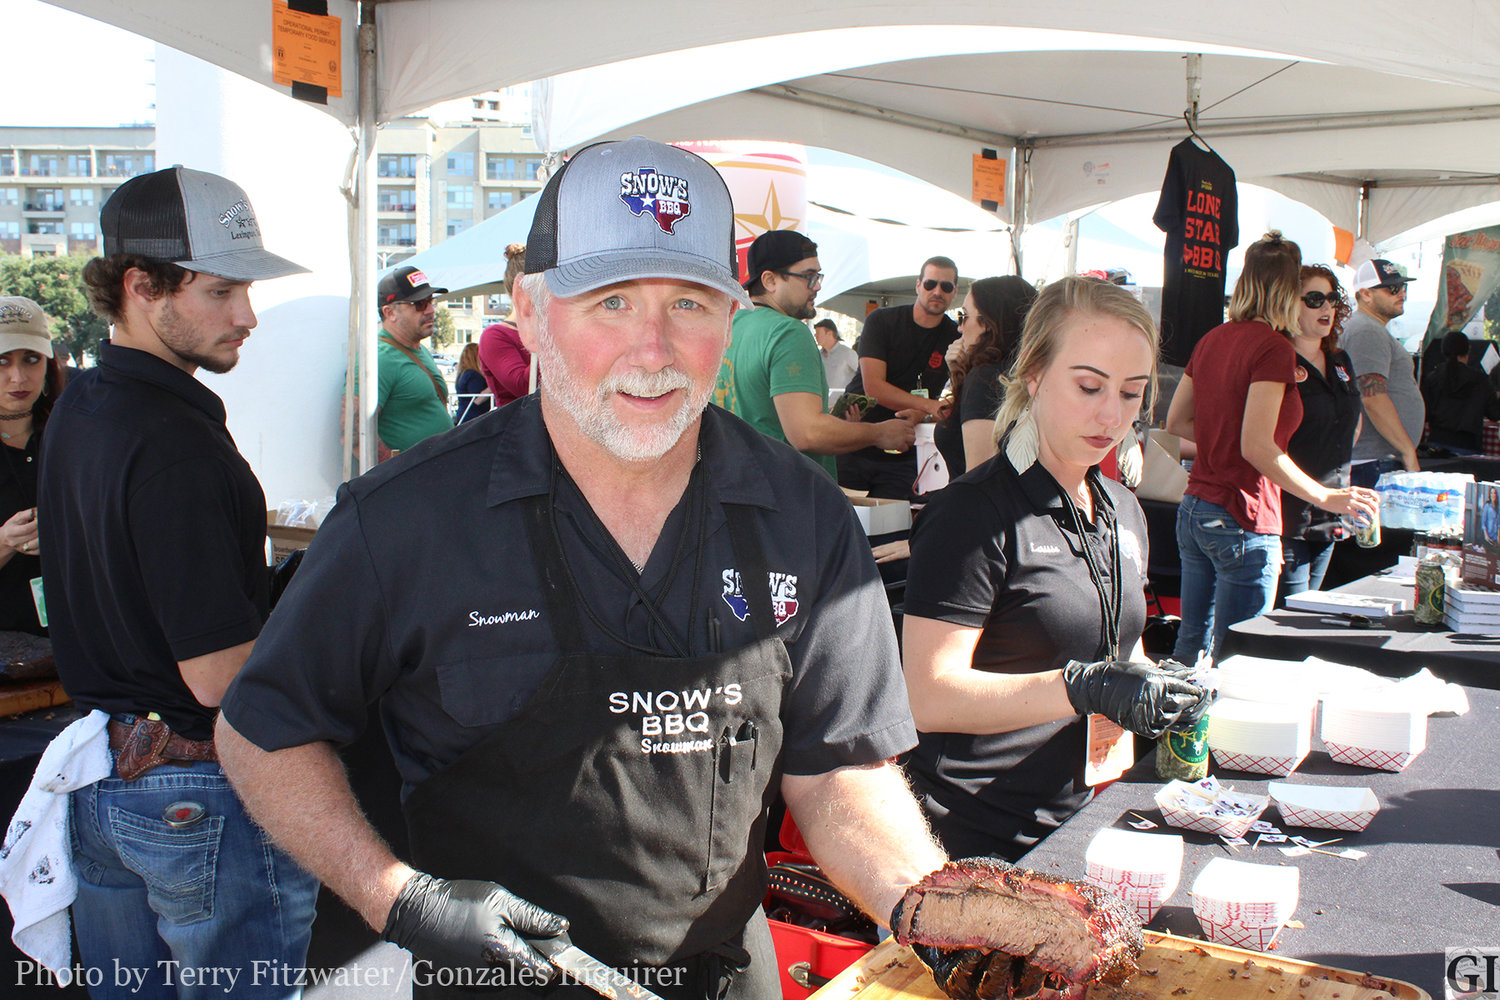 Kerry Bexley, the owner of Snow’s BBQ in Lexington, Texas shows off his world famous brisket.